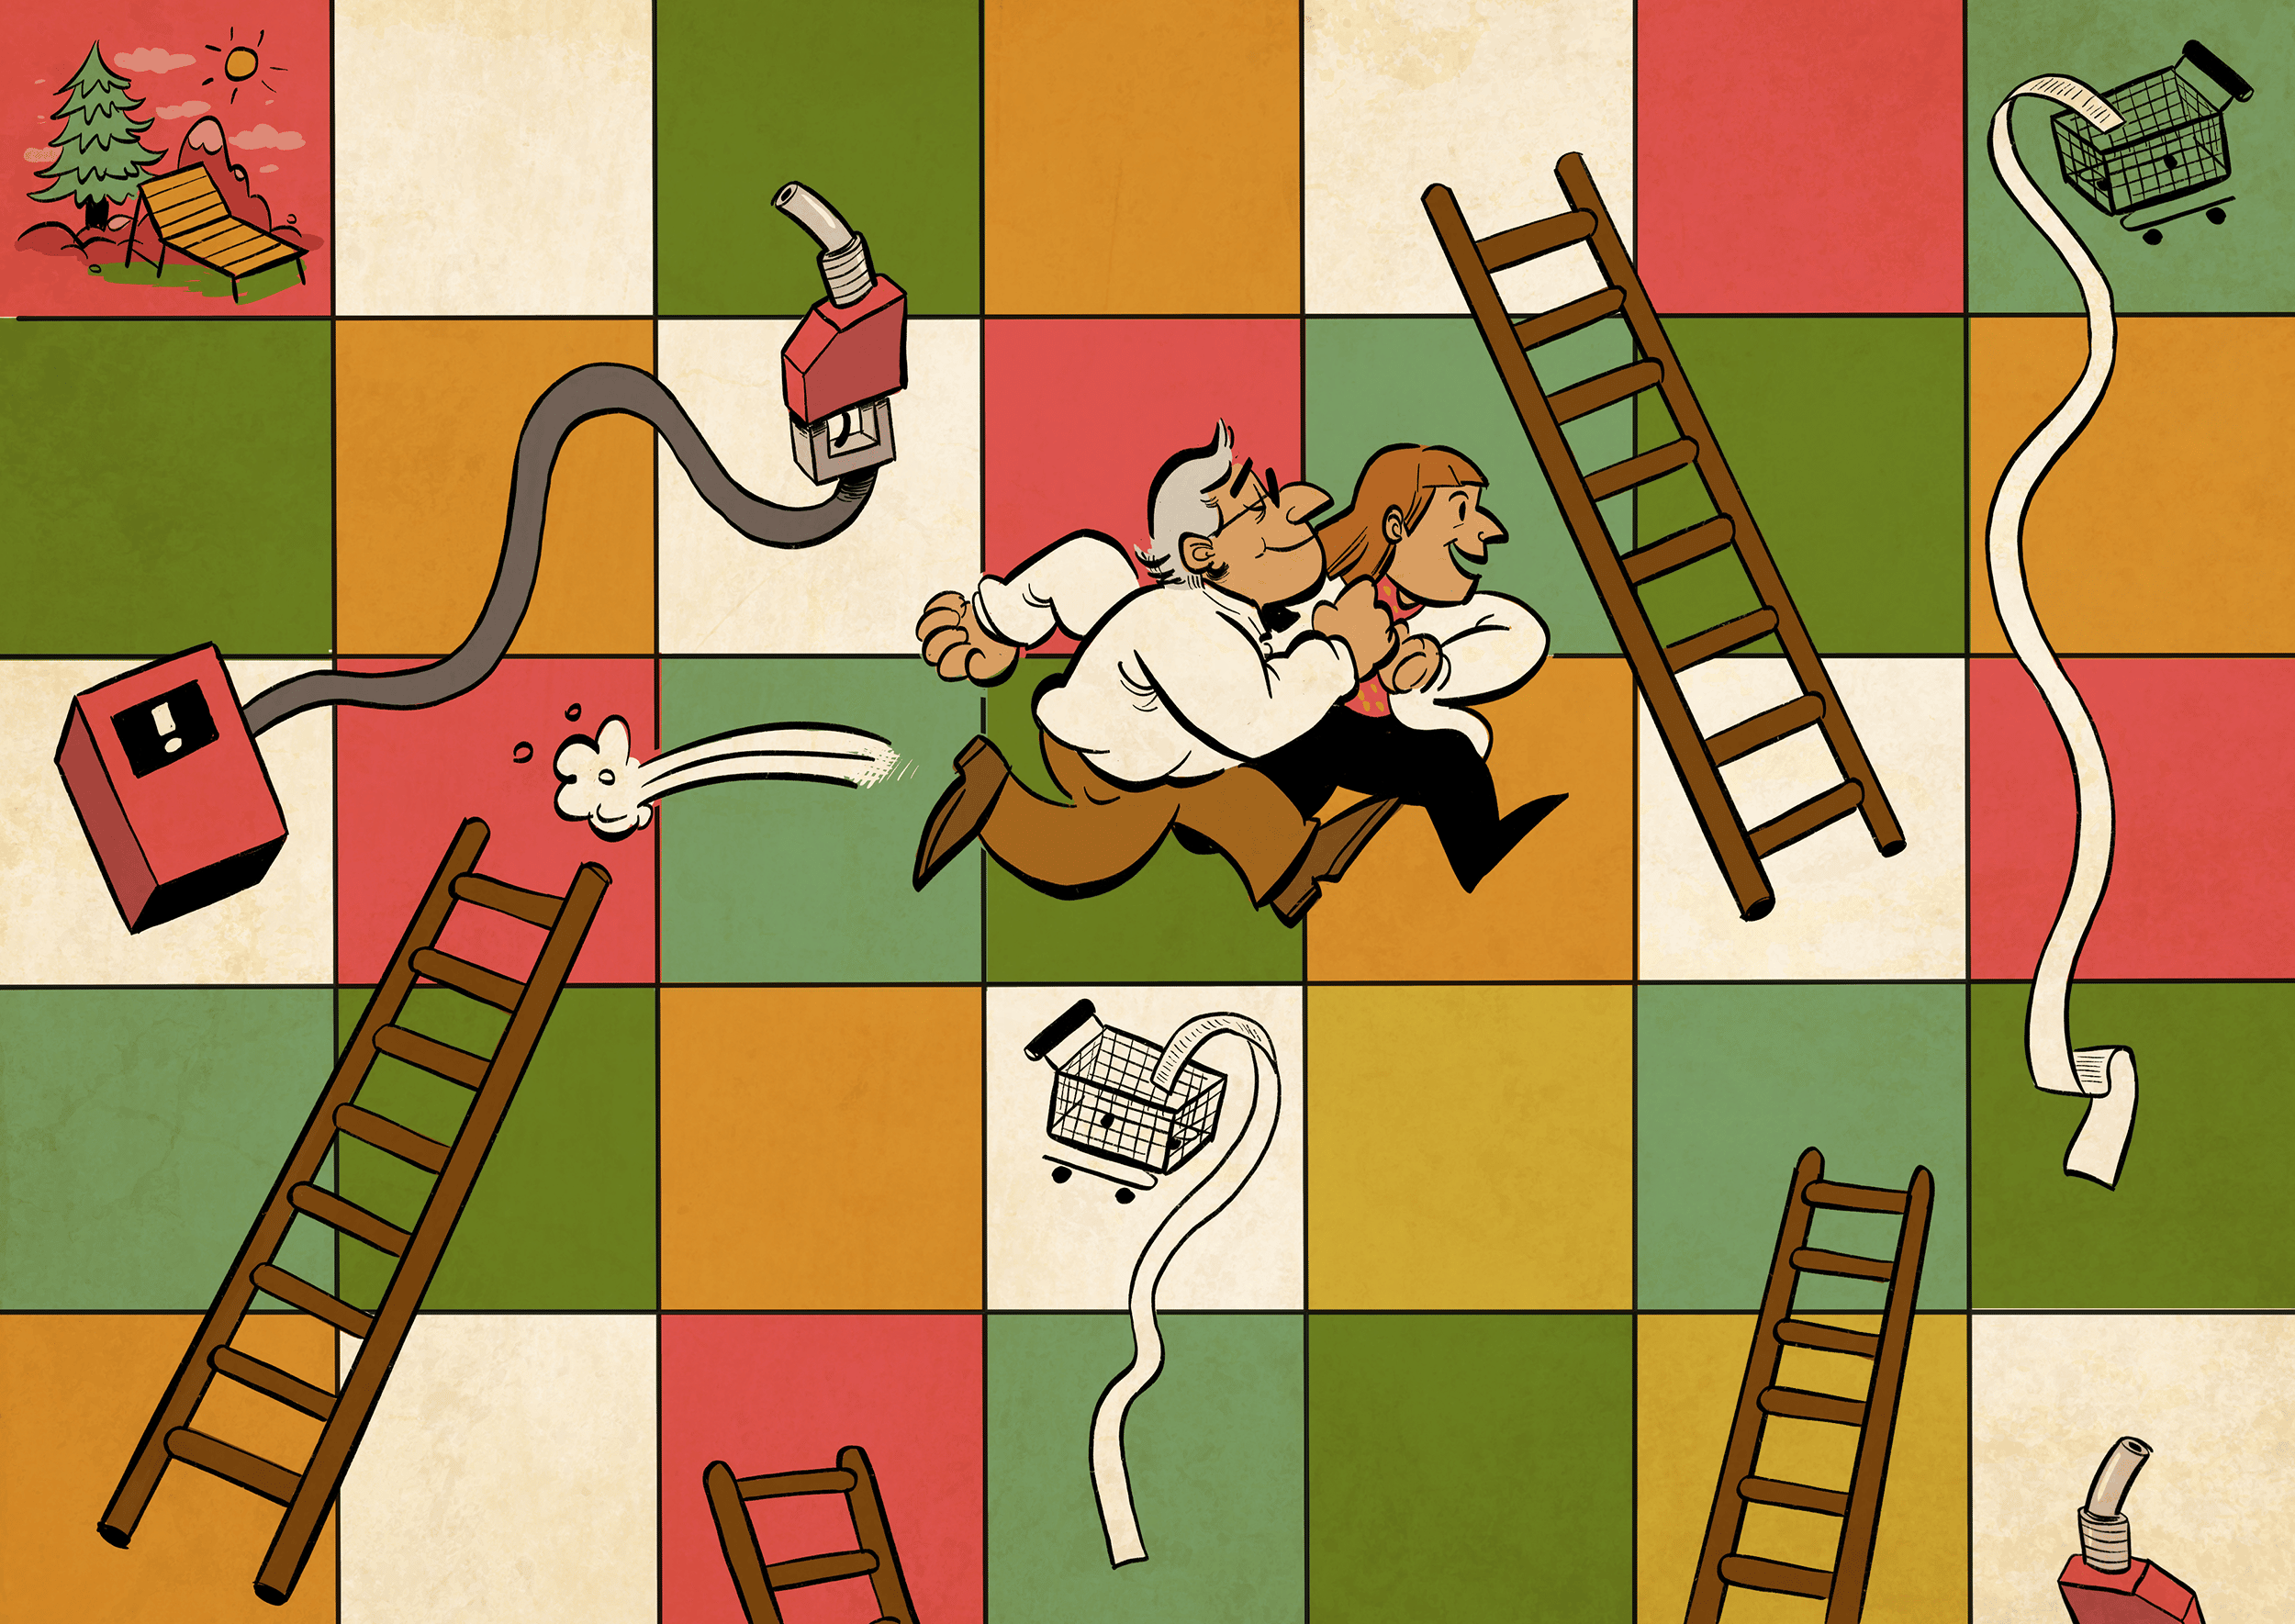 A couple running towards retirement in what looks like a snakes and ladder board